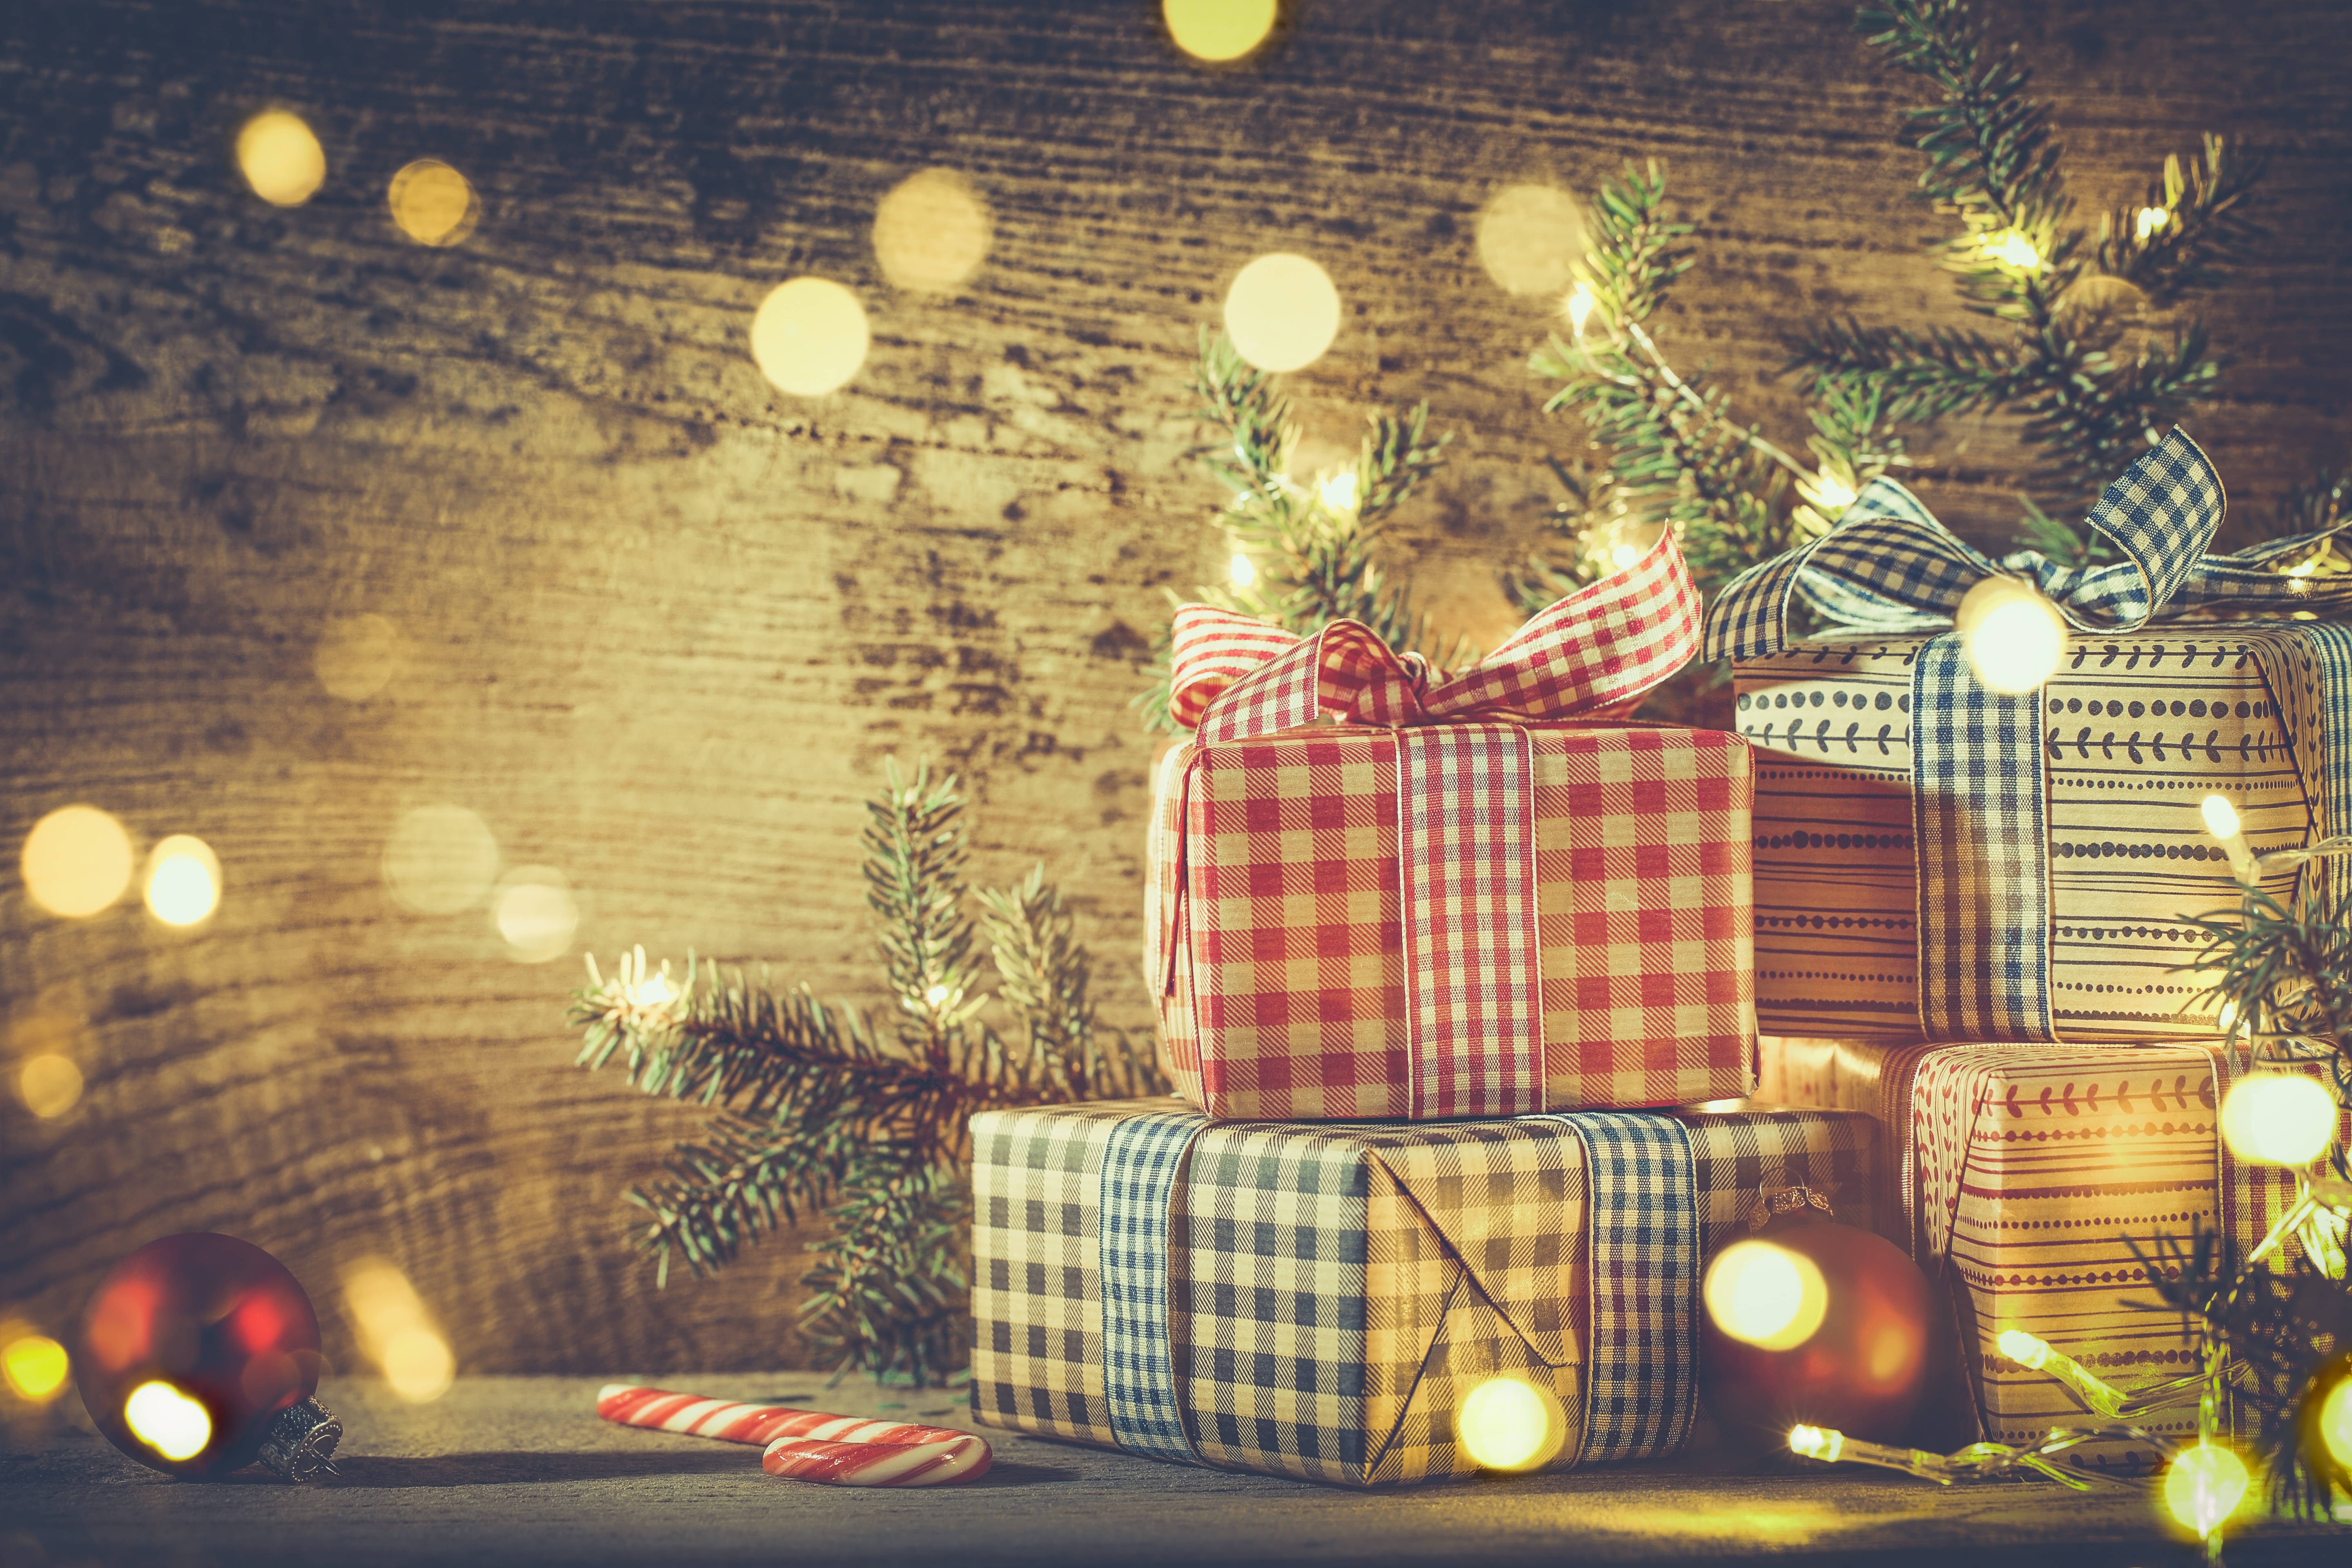 Image: New year, Christmas, gifts, boxes, glare, branch, fir tree, balls